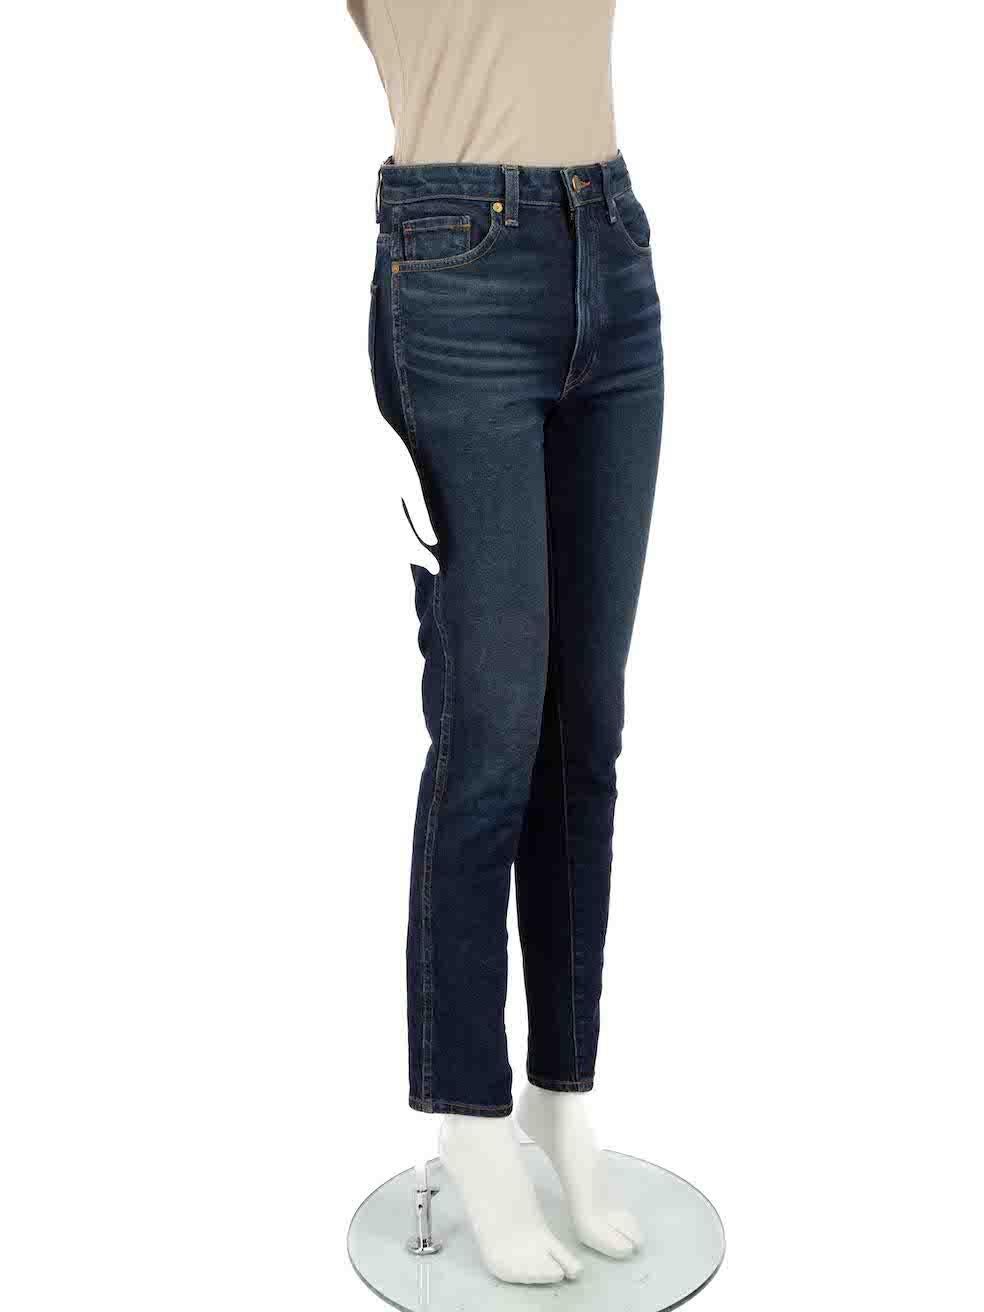 CONDITION is Very good. Minimal wear to jeans is evident. Minimal wear to the right leg with discoloured mark on this used Khaite designer resale item.
 
Details
Vanessa
Blue
Cotton
Skinny trousers
Mid rise
Stone washed
Front zip closure with